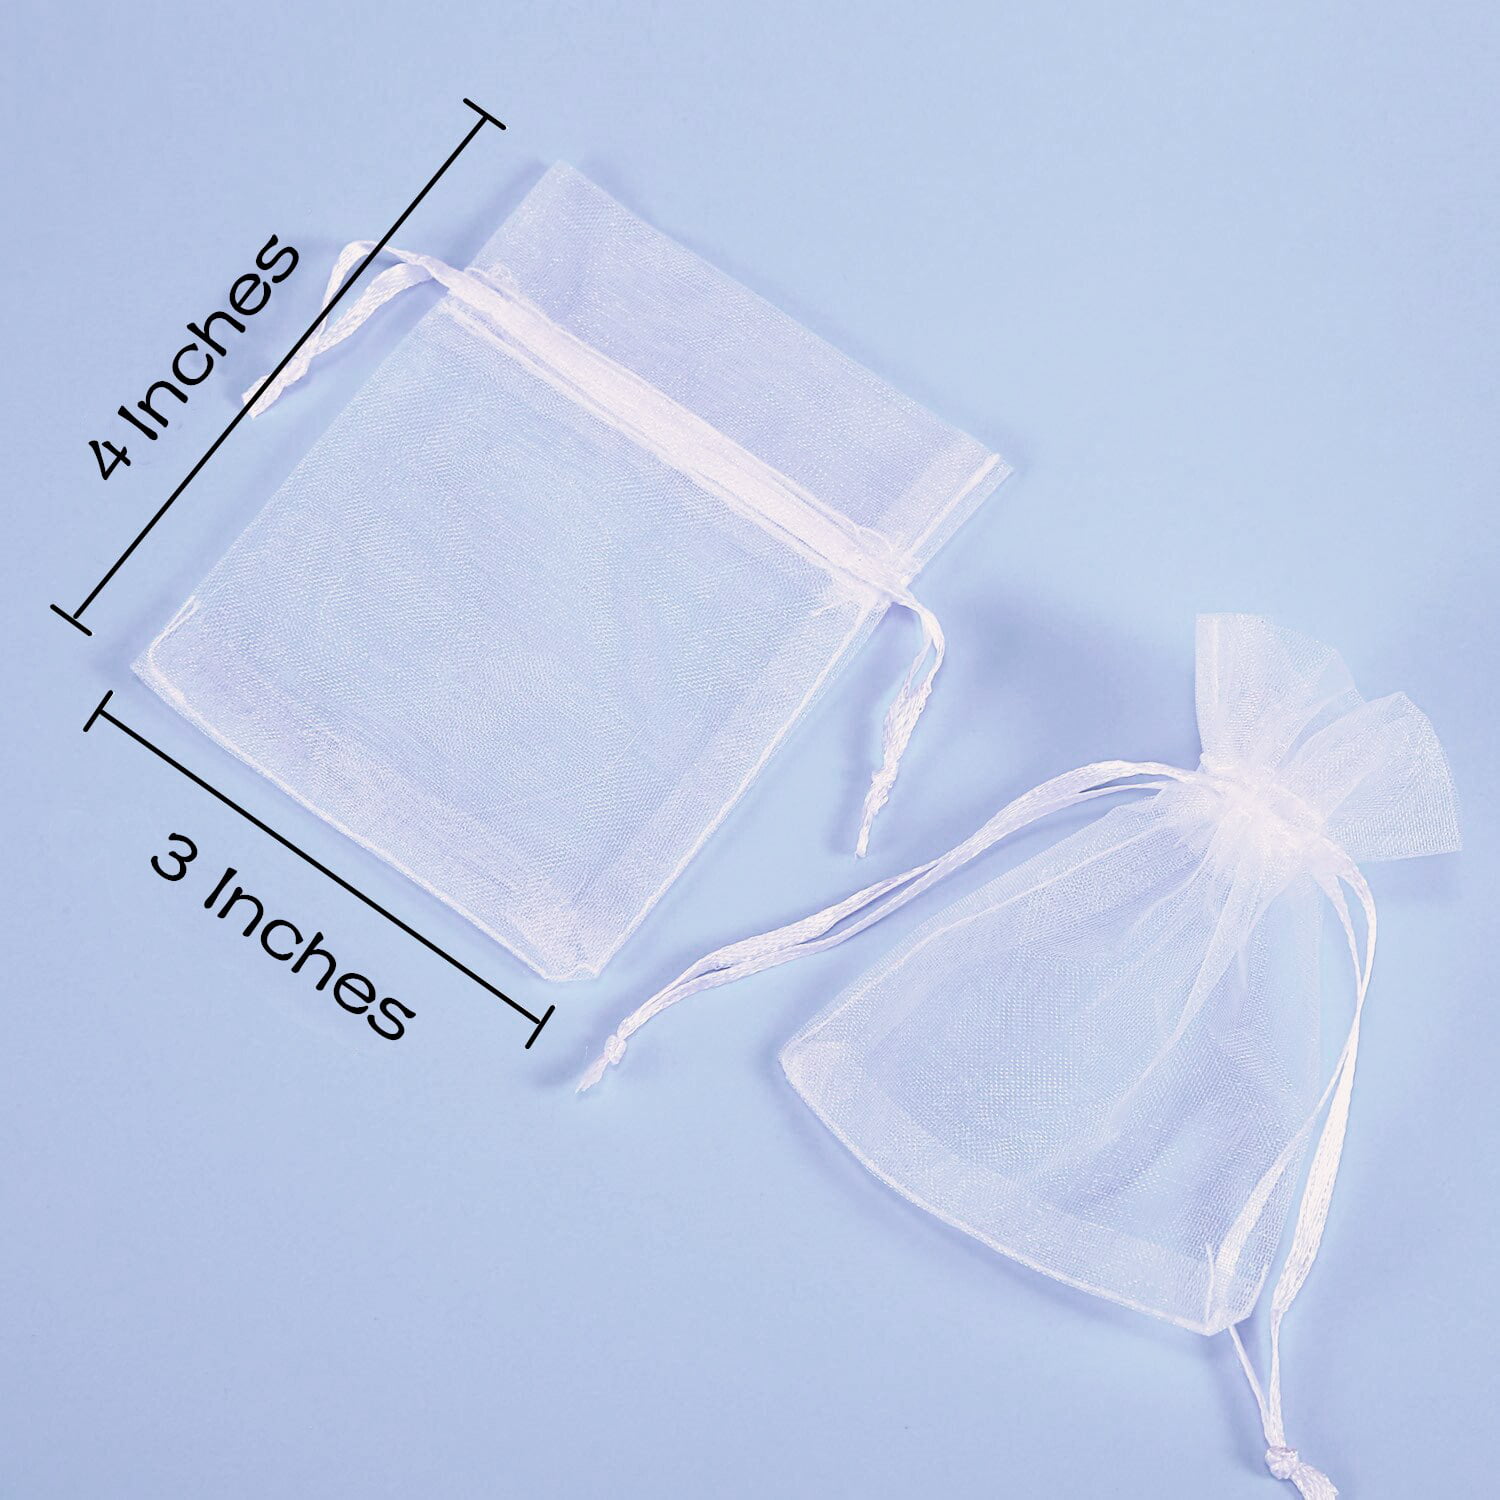 100PCS Small Mesh Bags Drawstring 3x4,Sheer Organza Bags Drawstring for  Jewelry, Mesh Party Wedding Favor Bags for Small Business,Candy,Bracelet  Packaging,Empty Sachet Bags(NO.6132) 